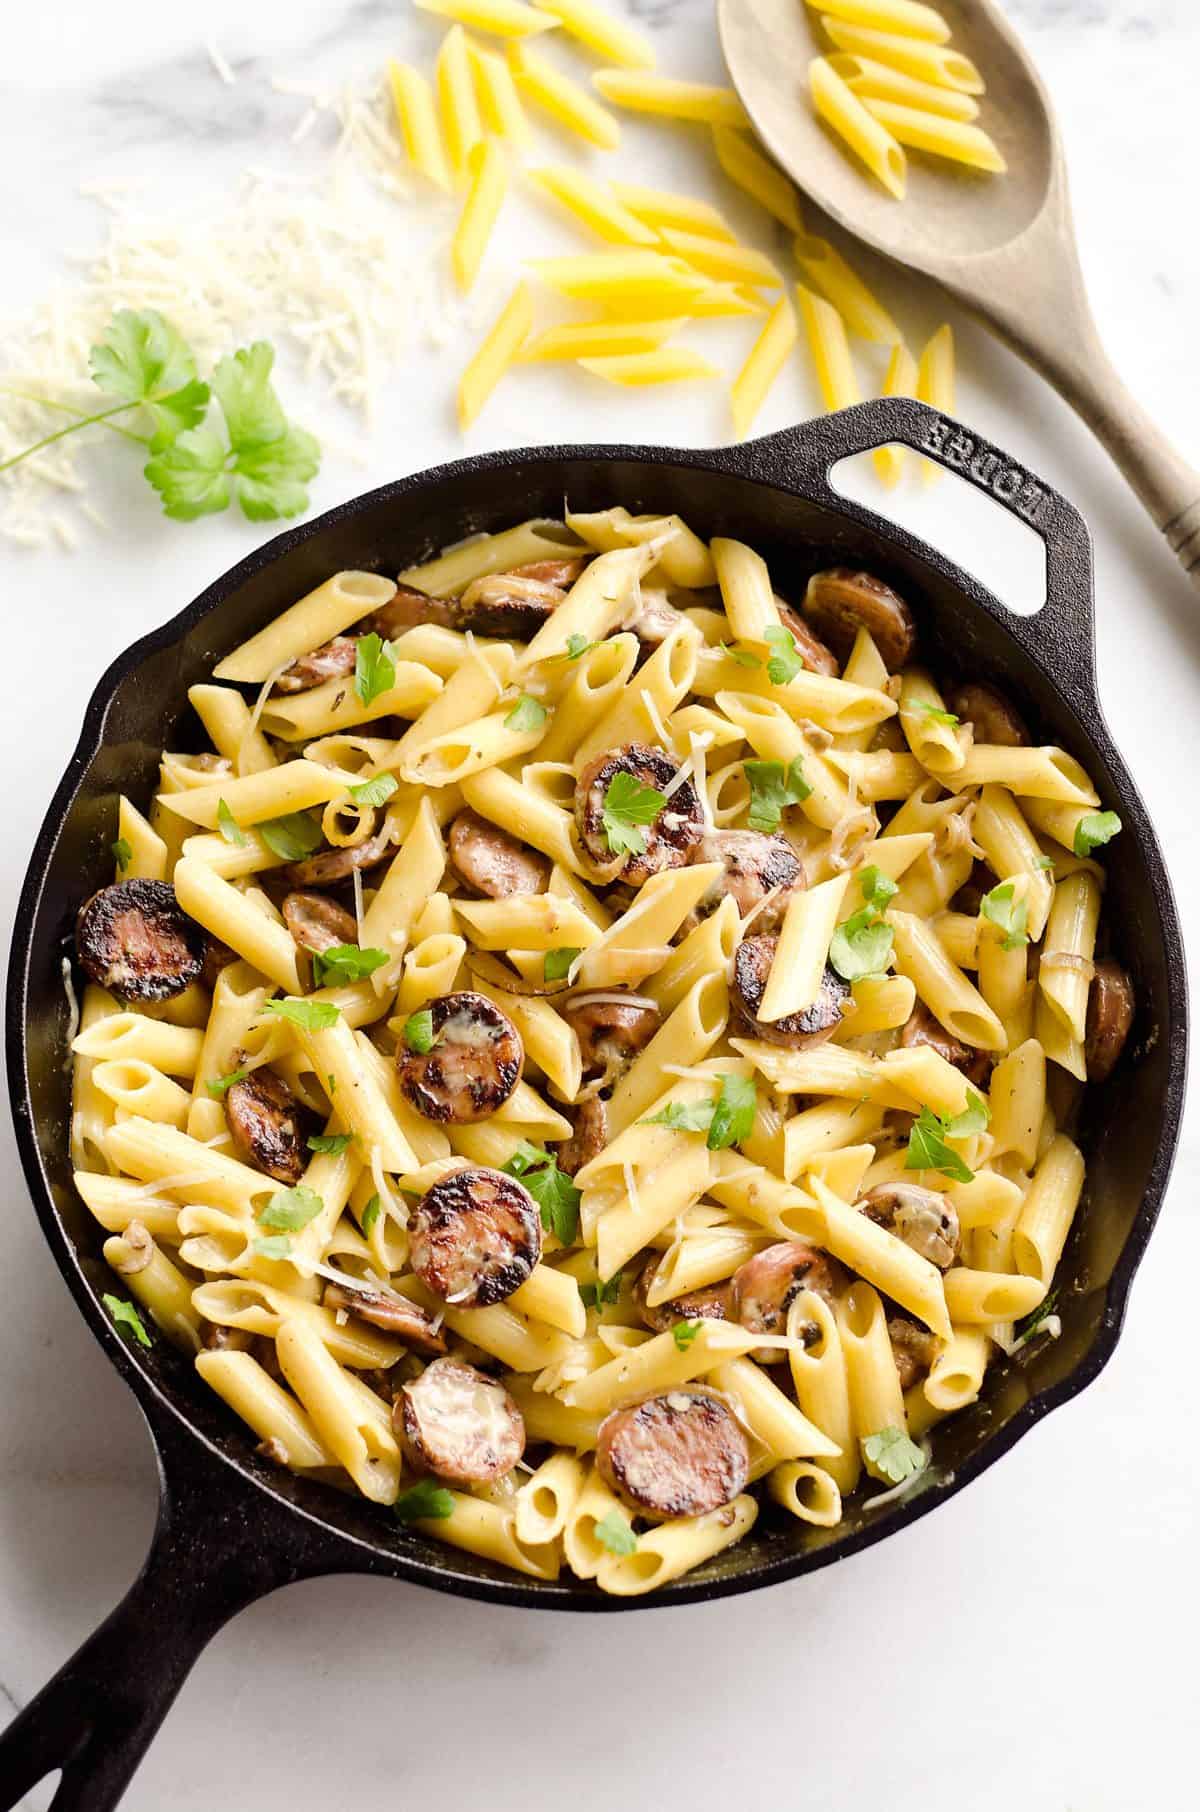 Chicken Sausage & Penne Skillet is an easy gluten free dinner idea loaded with rich flavors. Penne Pasta is tossed with a white wine and Parmesan cream sauce along with chicken apple sausage and shallots for a hearty dinner bursting with amazing flavor. 